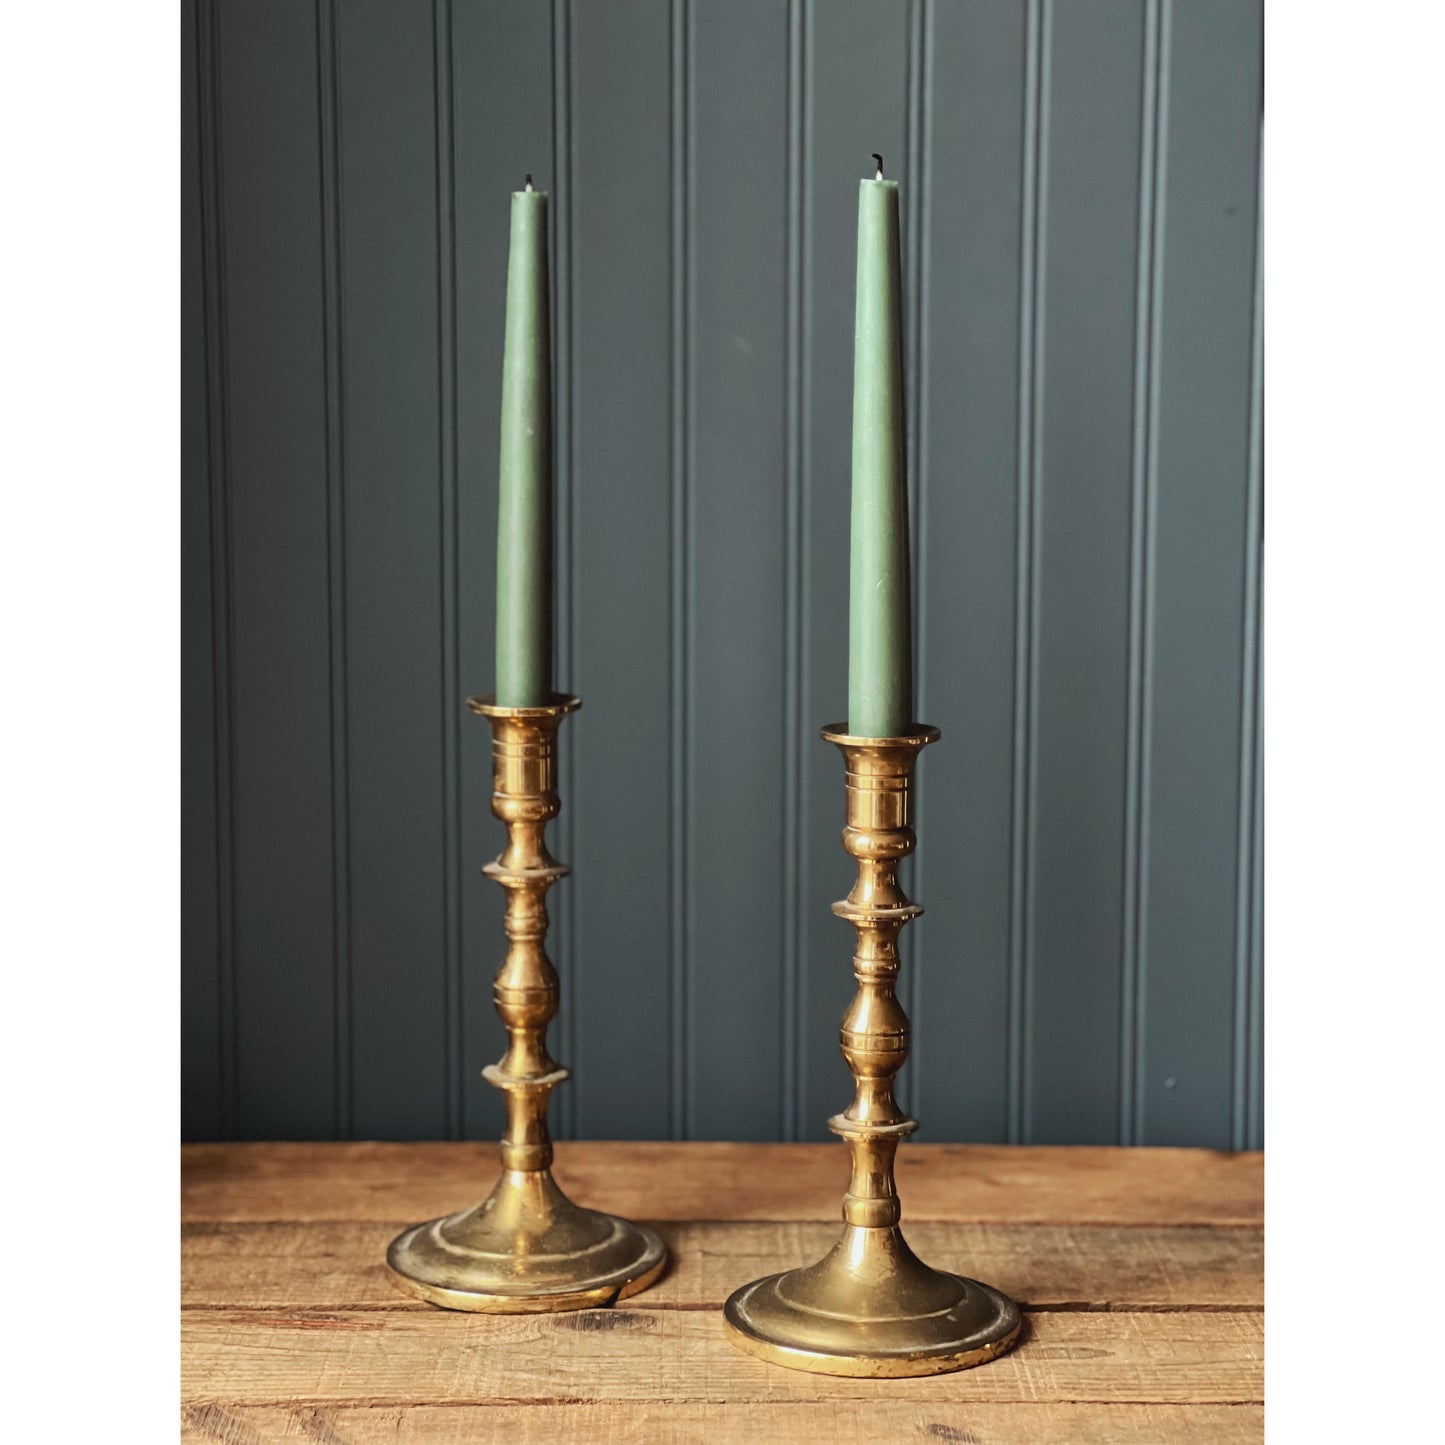 Tall Turned Vintage Brass Taper Candleholders